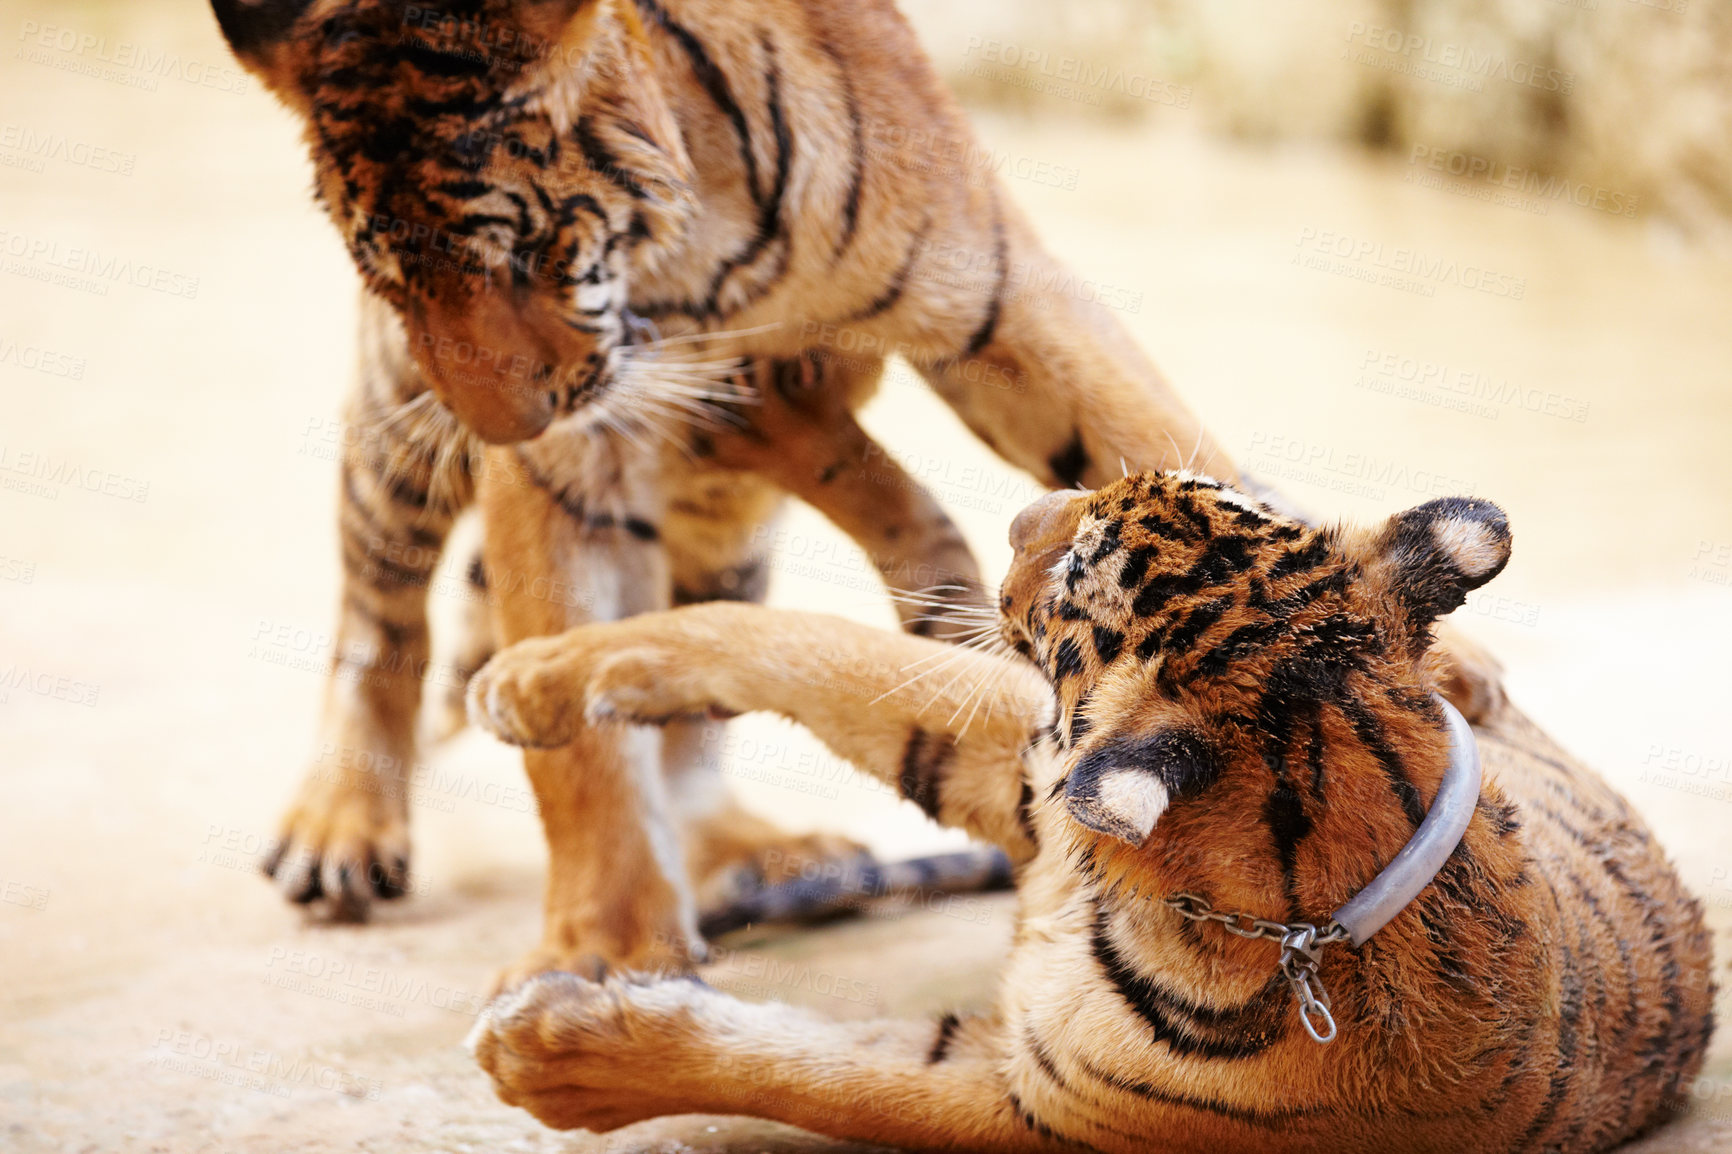 Buy stock photo Tigers, playing and outdoor in nature by a zoo for majestic entertainment at a circus or habitat. Wildlife, wrestling and big cats exotic animals family together in a desert or dune conservation.